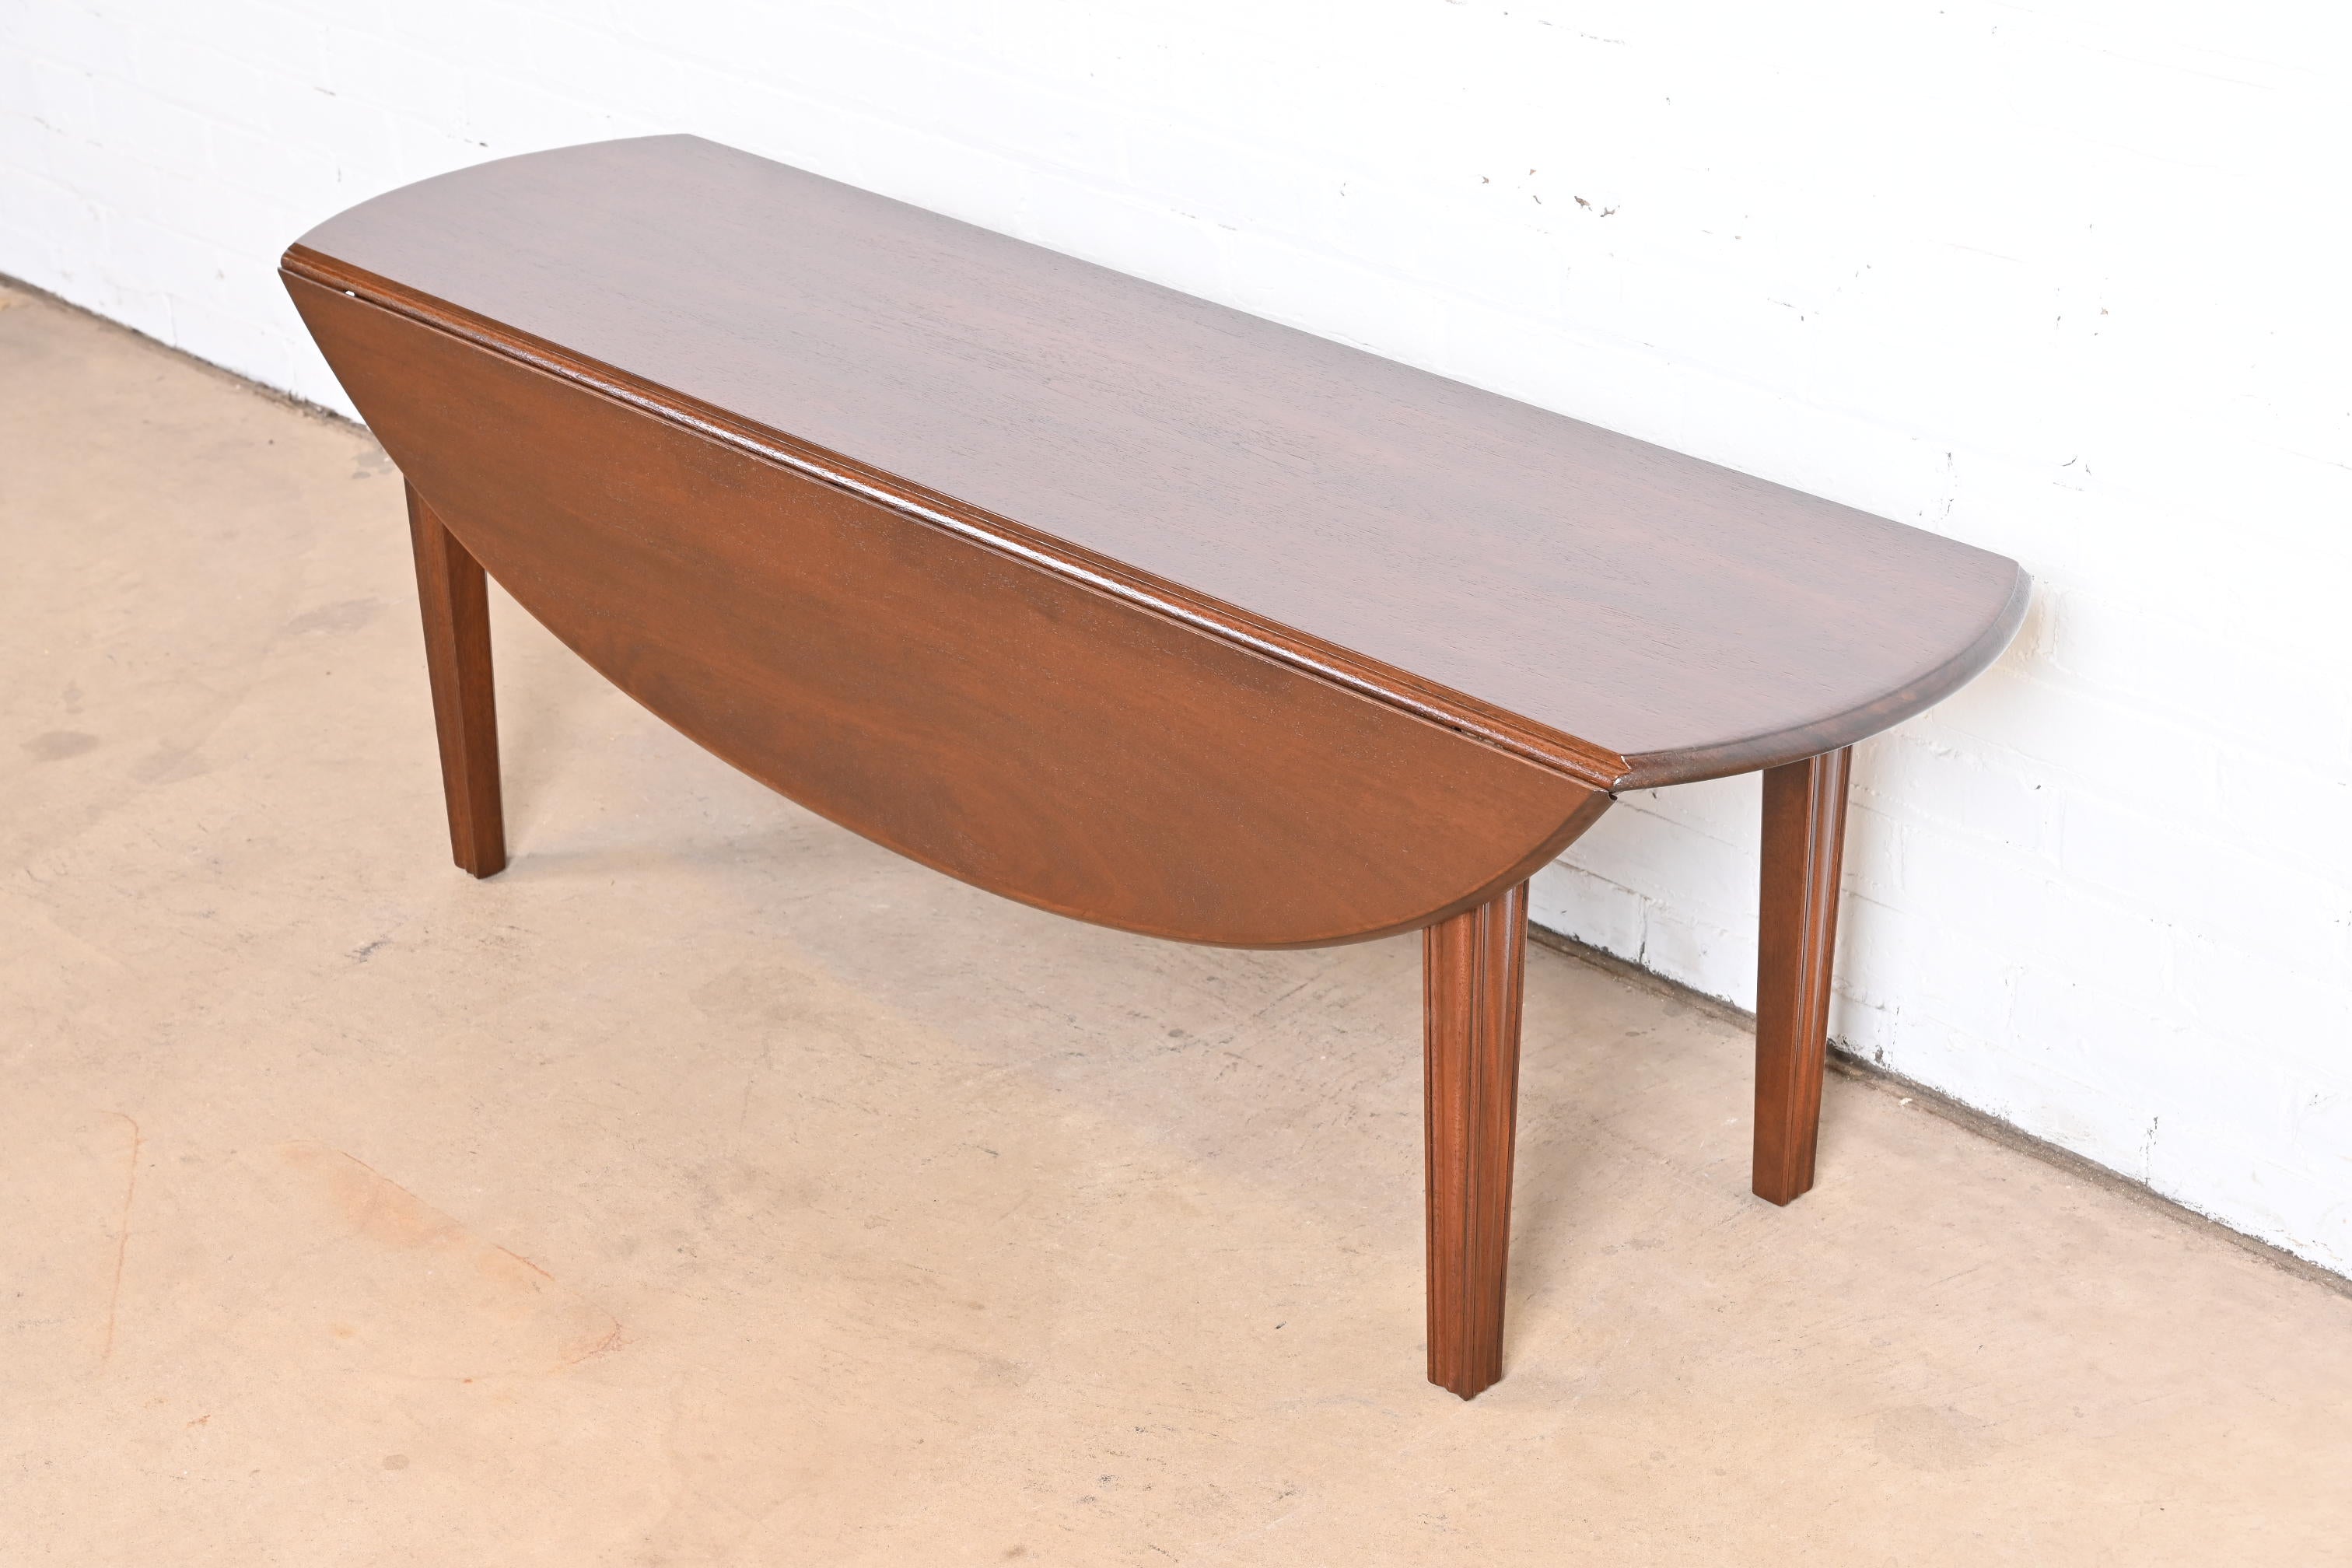 Kittinger American Colonial Mahogany Drop Leaf Coffee Table, Newly Refinished For Sale 3